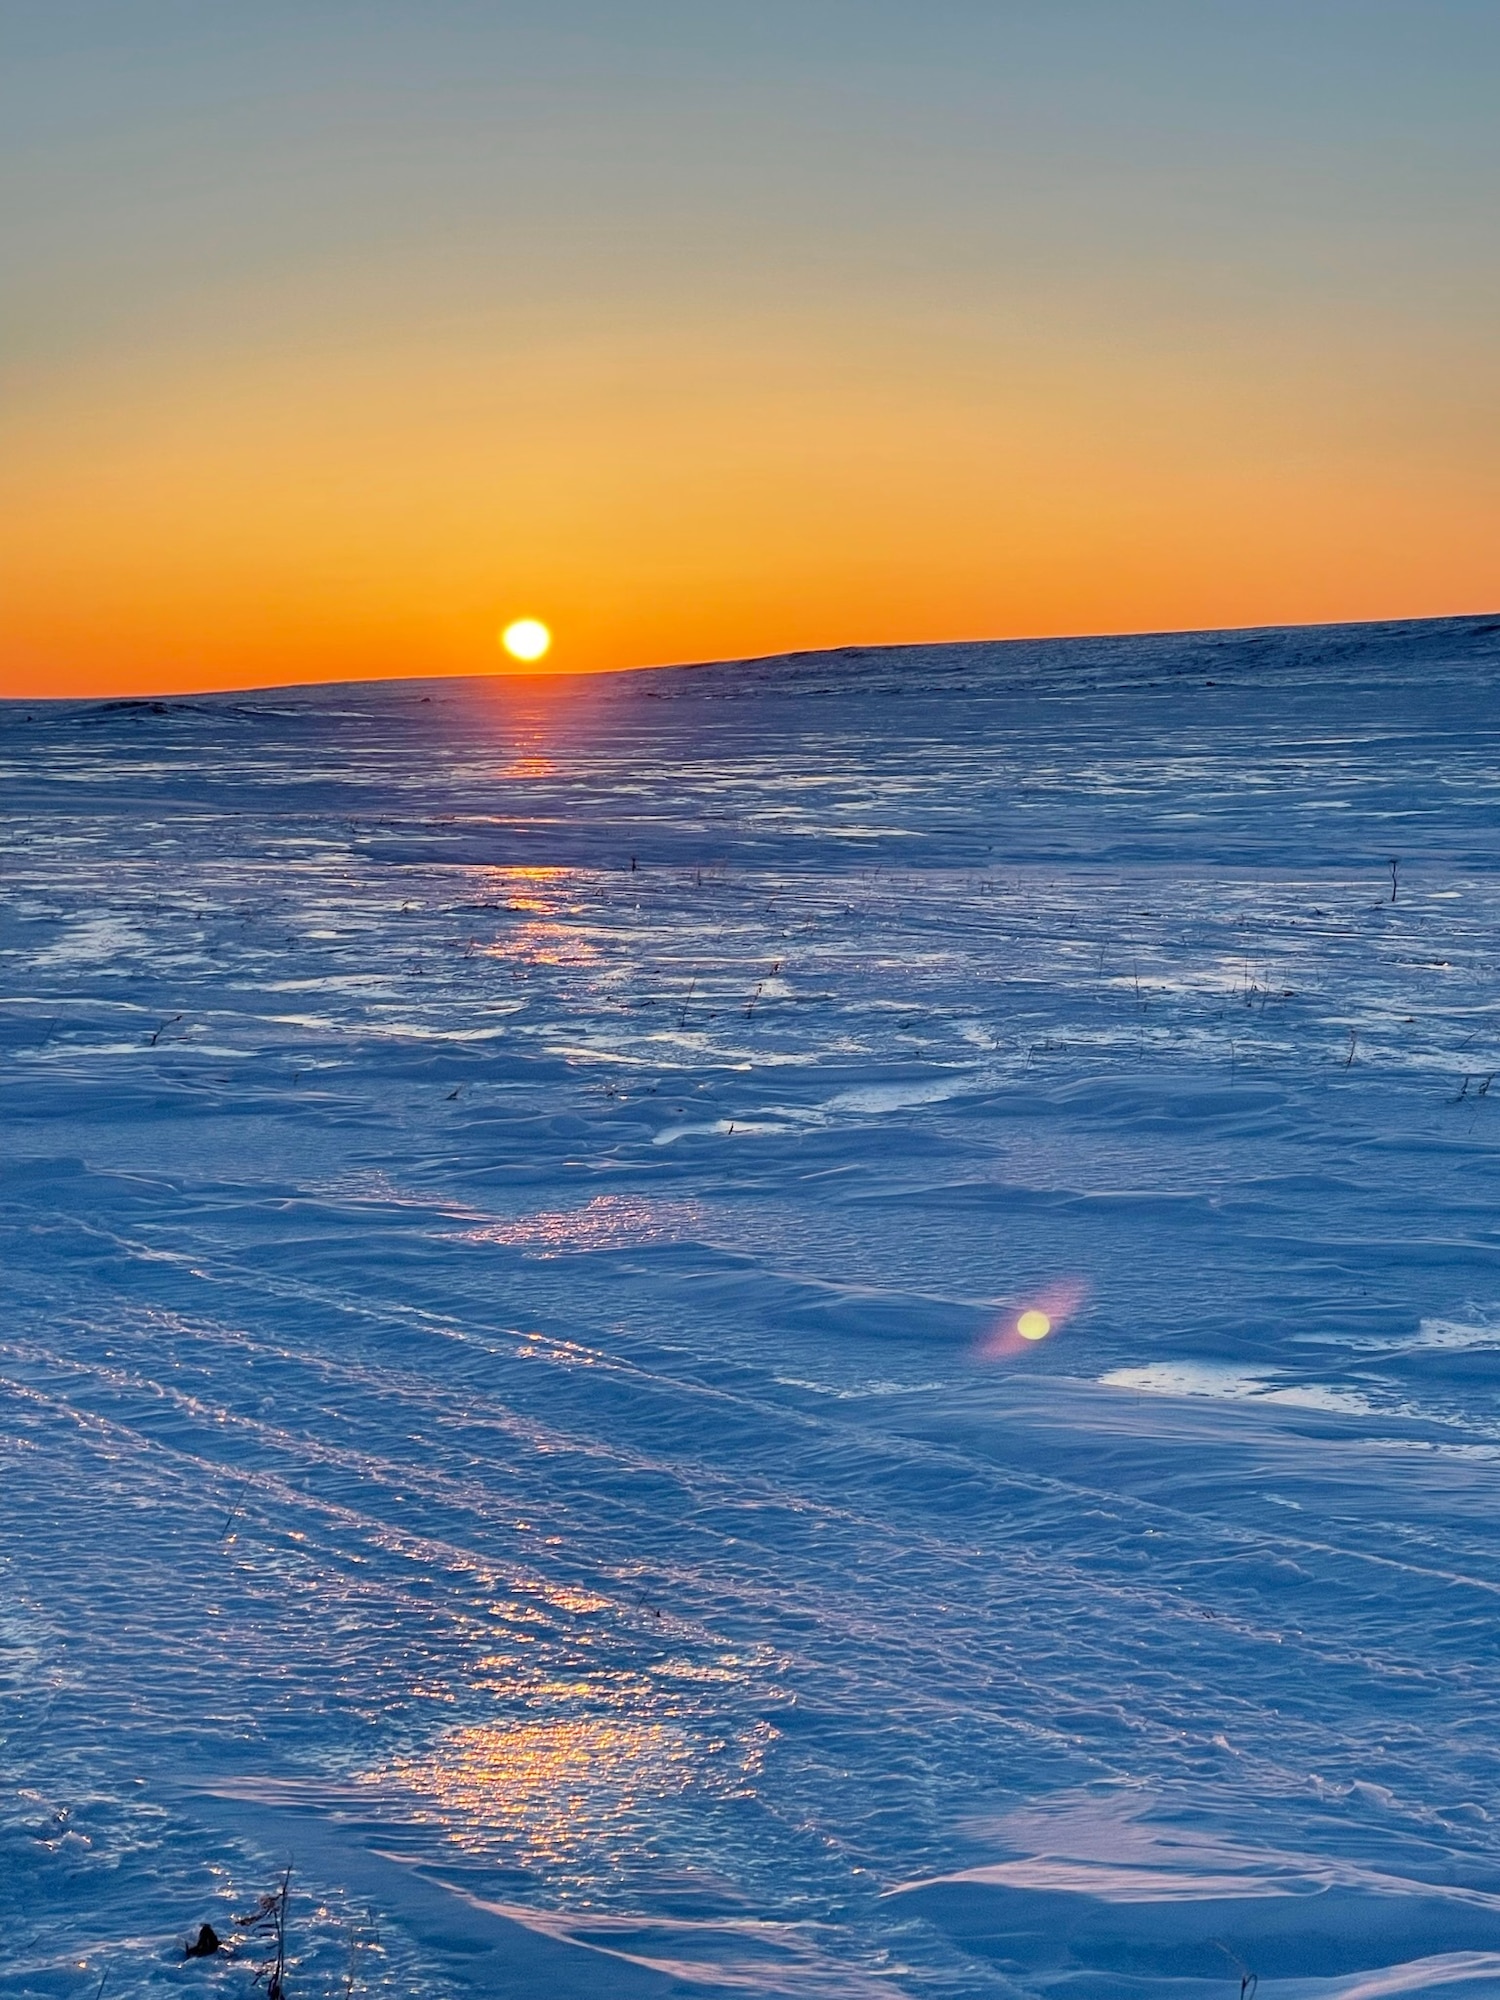 A photo of the sun rising above an icy landscape.